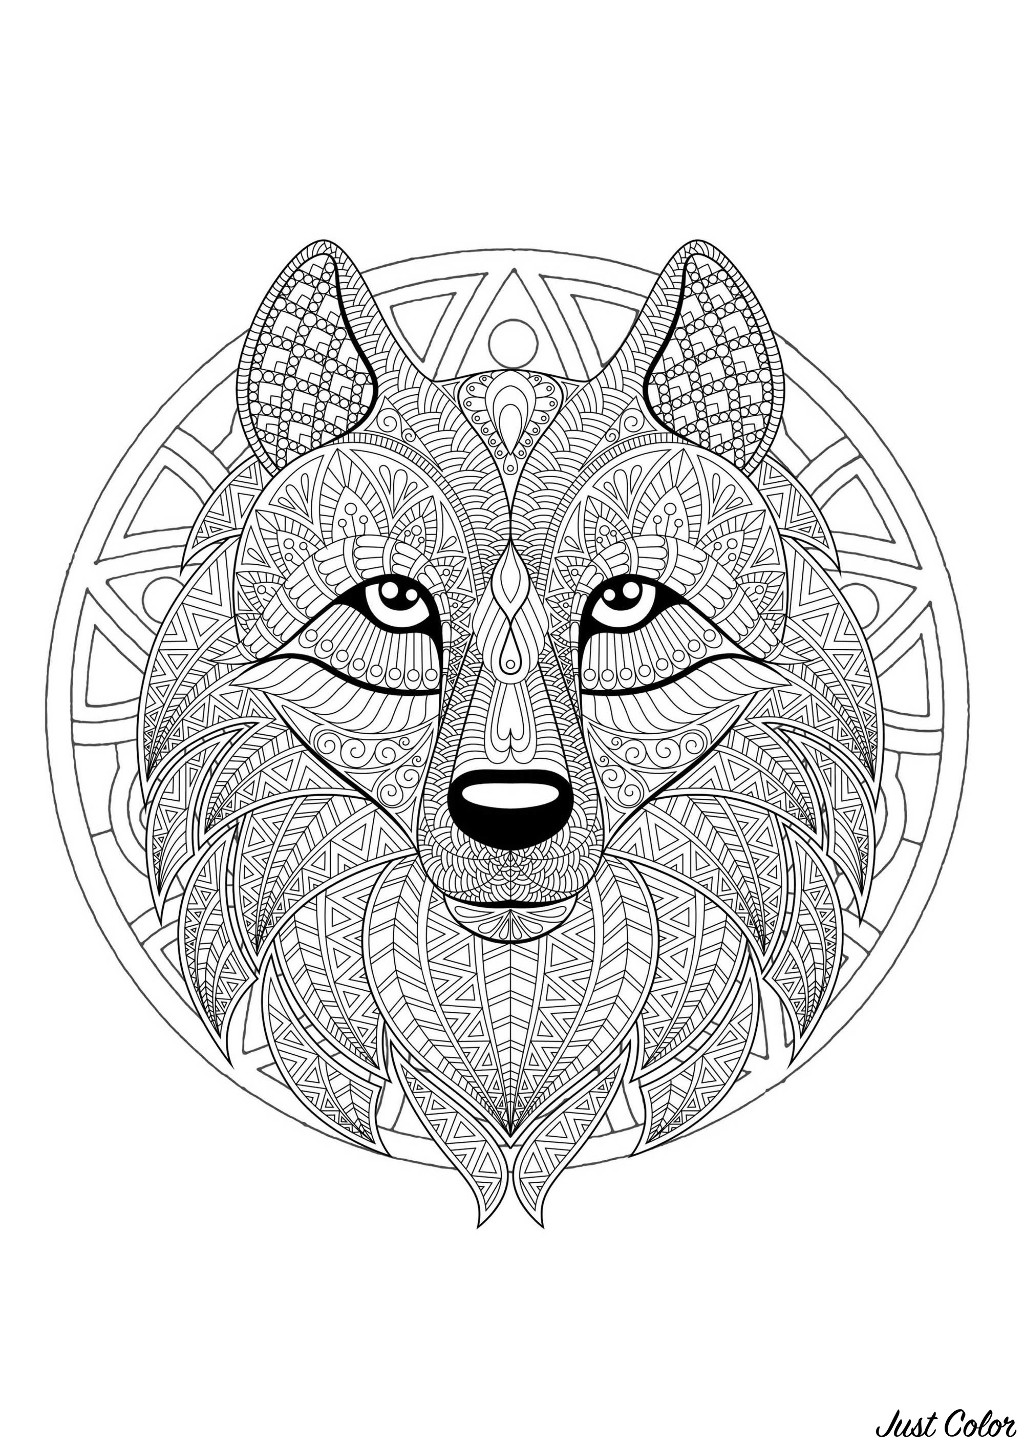 Prepare your best colors to give life to this beautiful wolf. Don't hesitate to share the result with us by sending it !